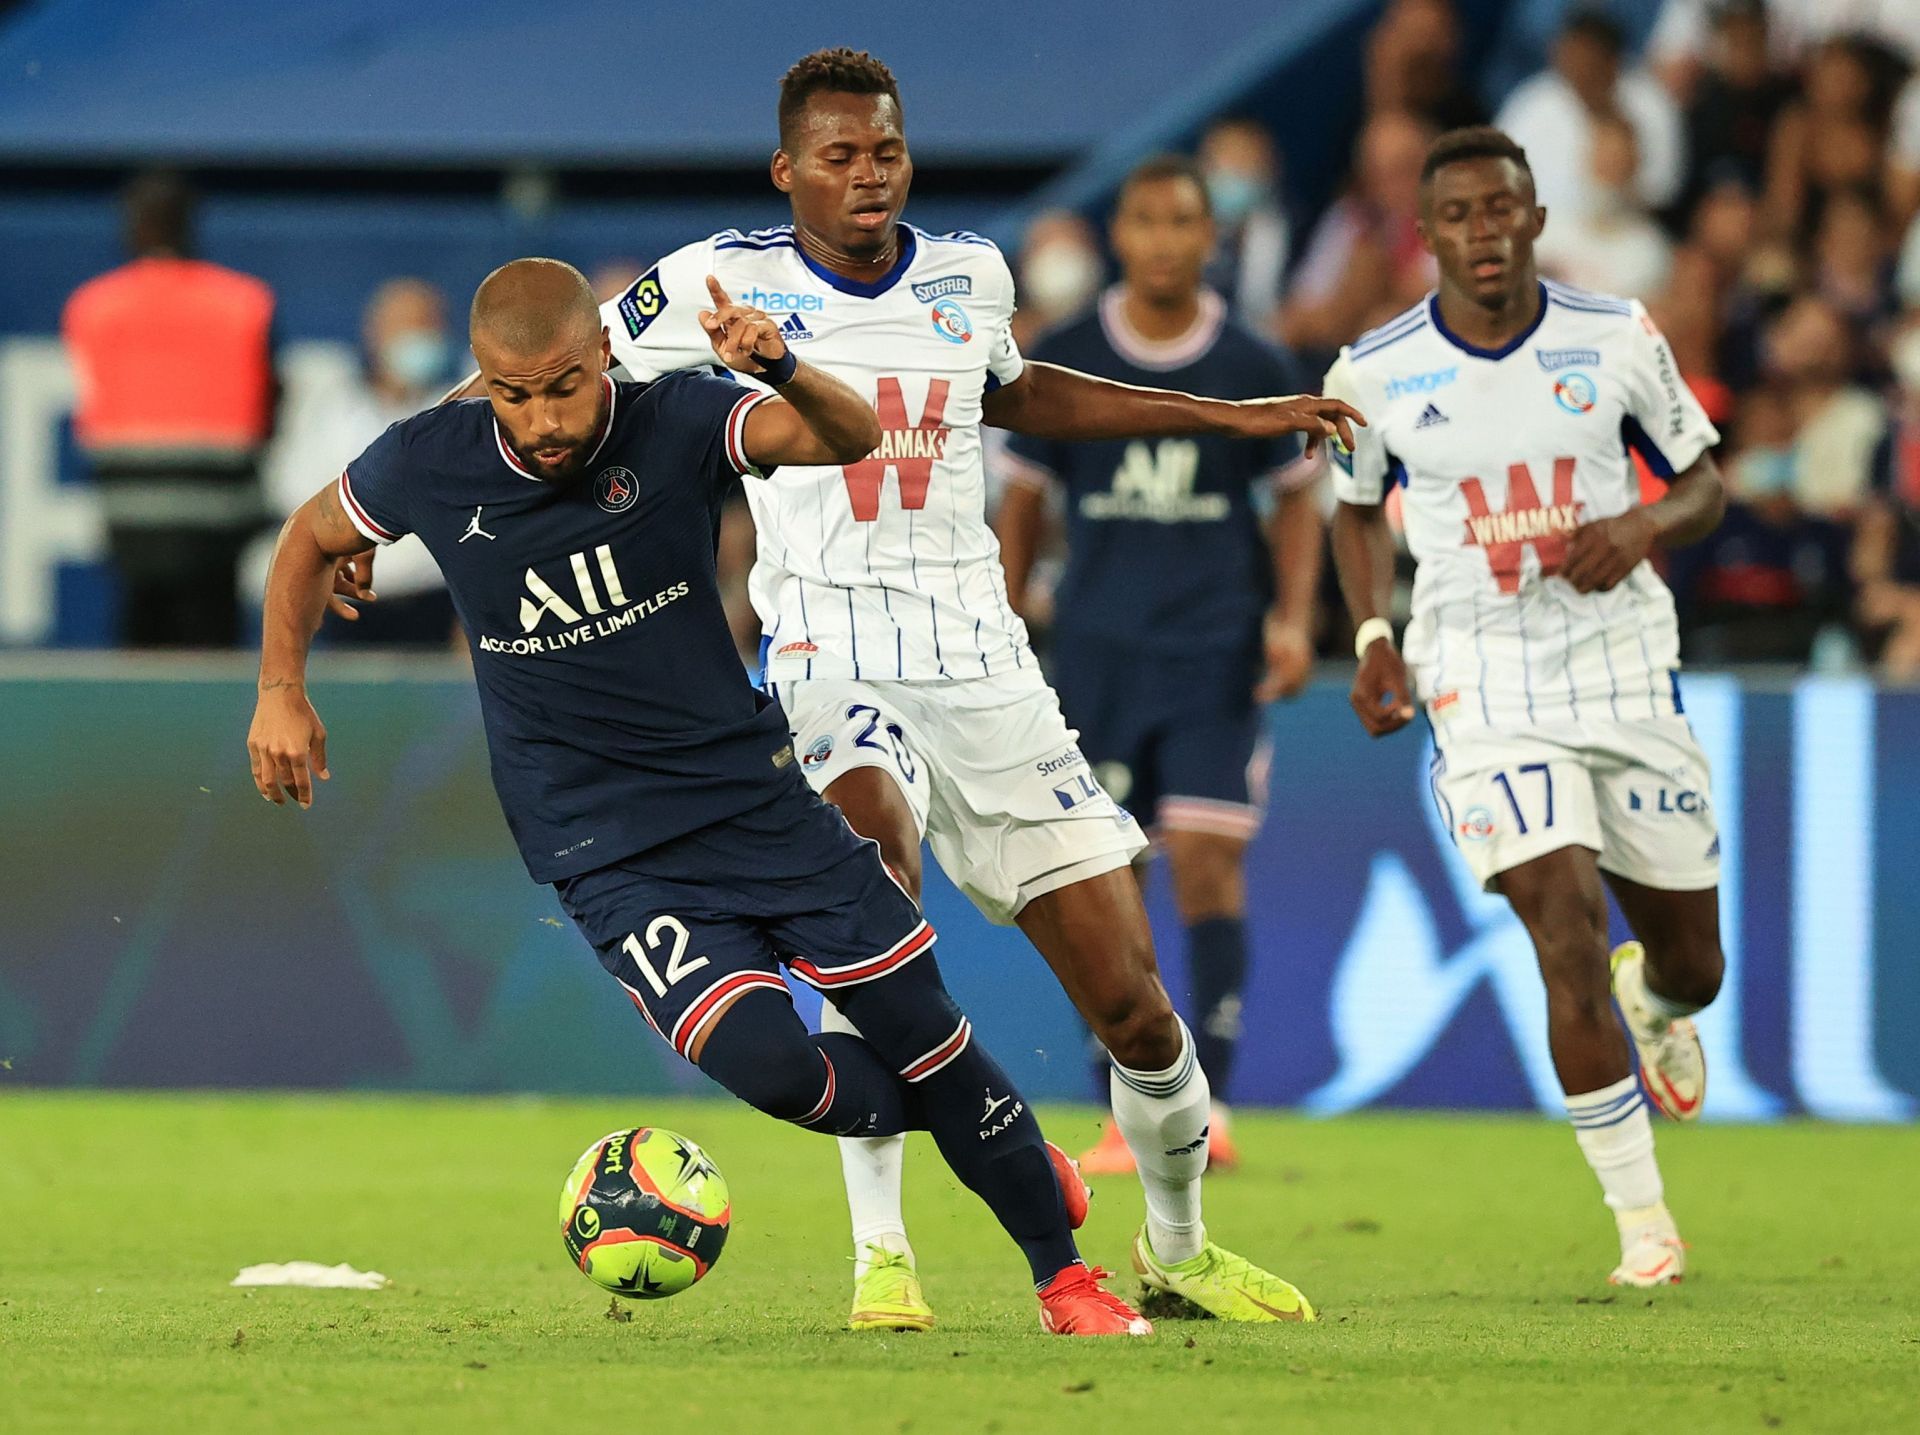 In his first season at Paris, Rafinha played in 34 games across all competitions